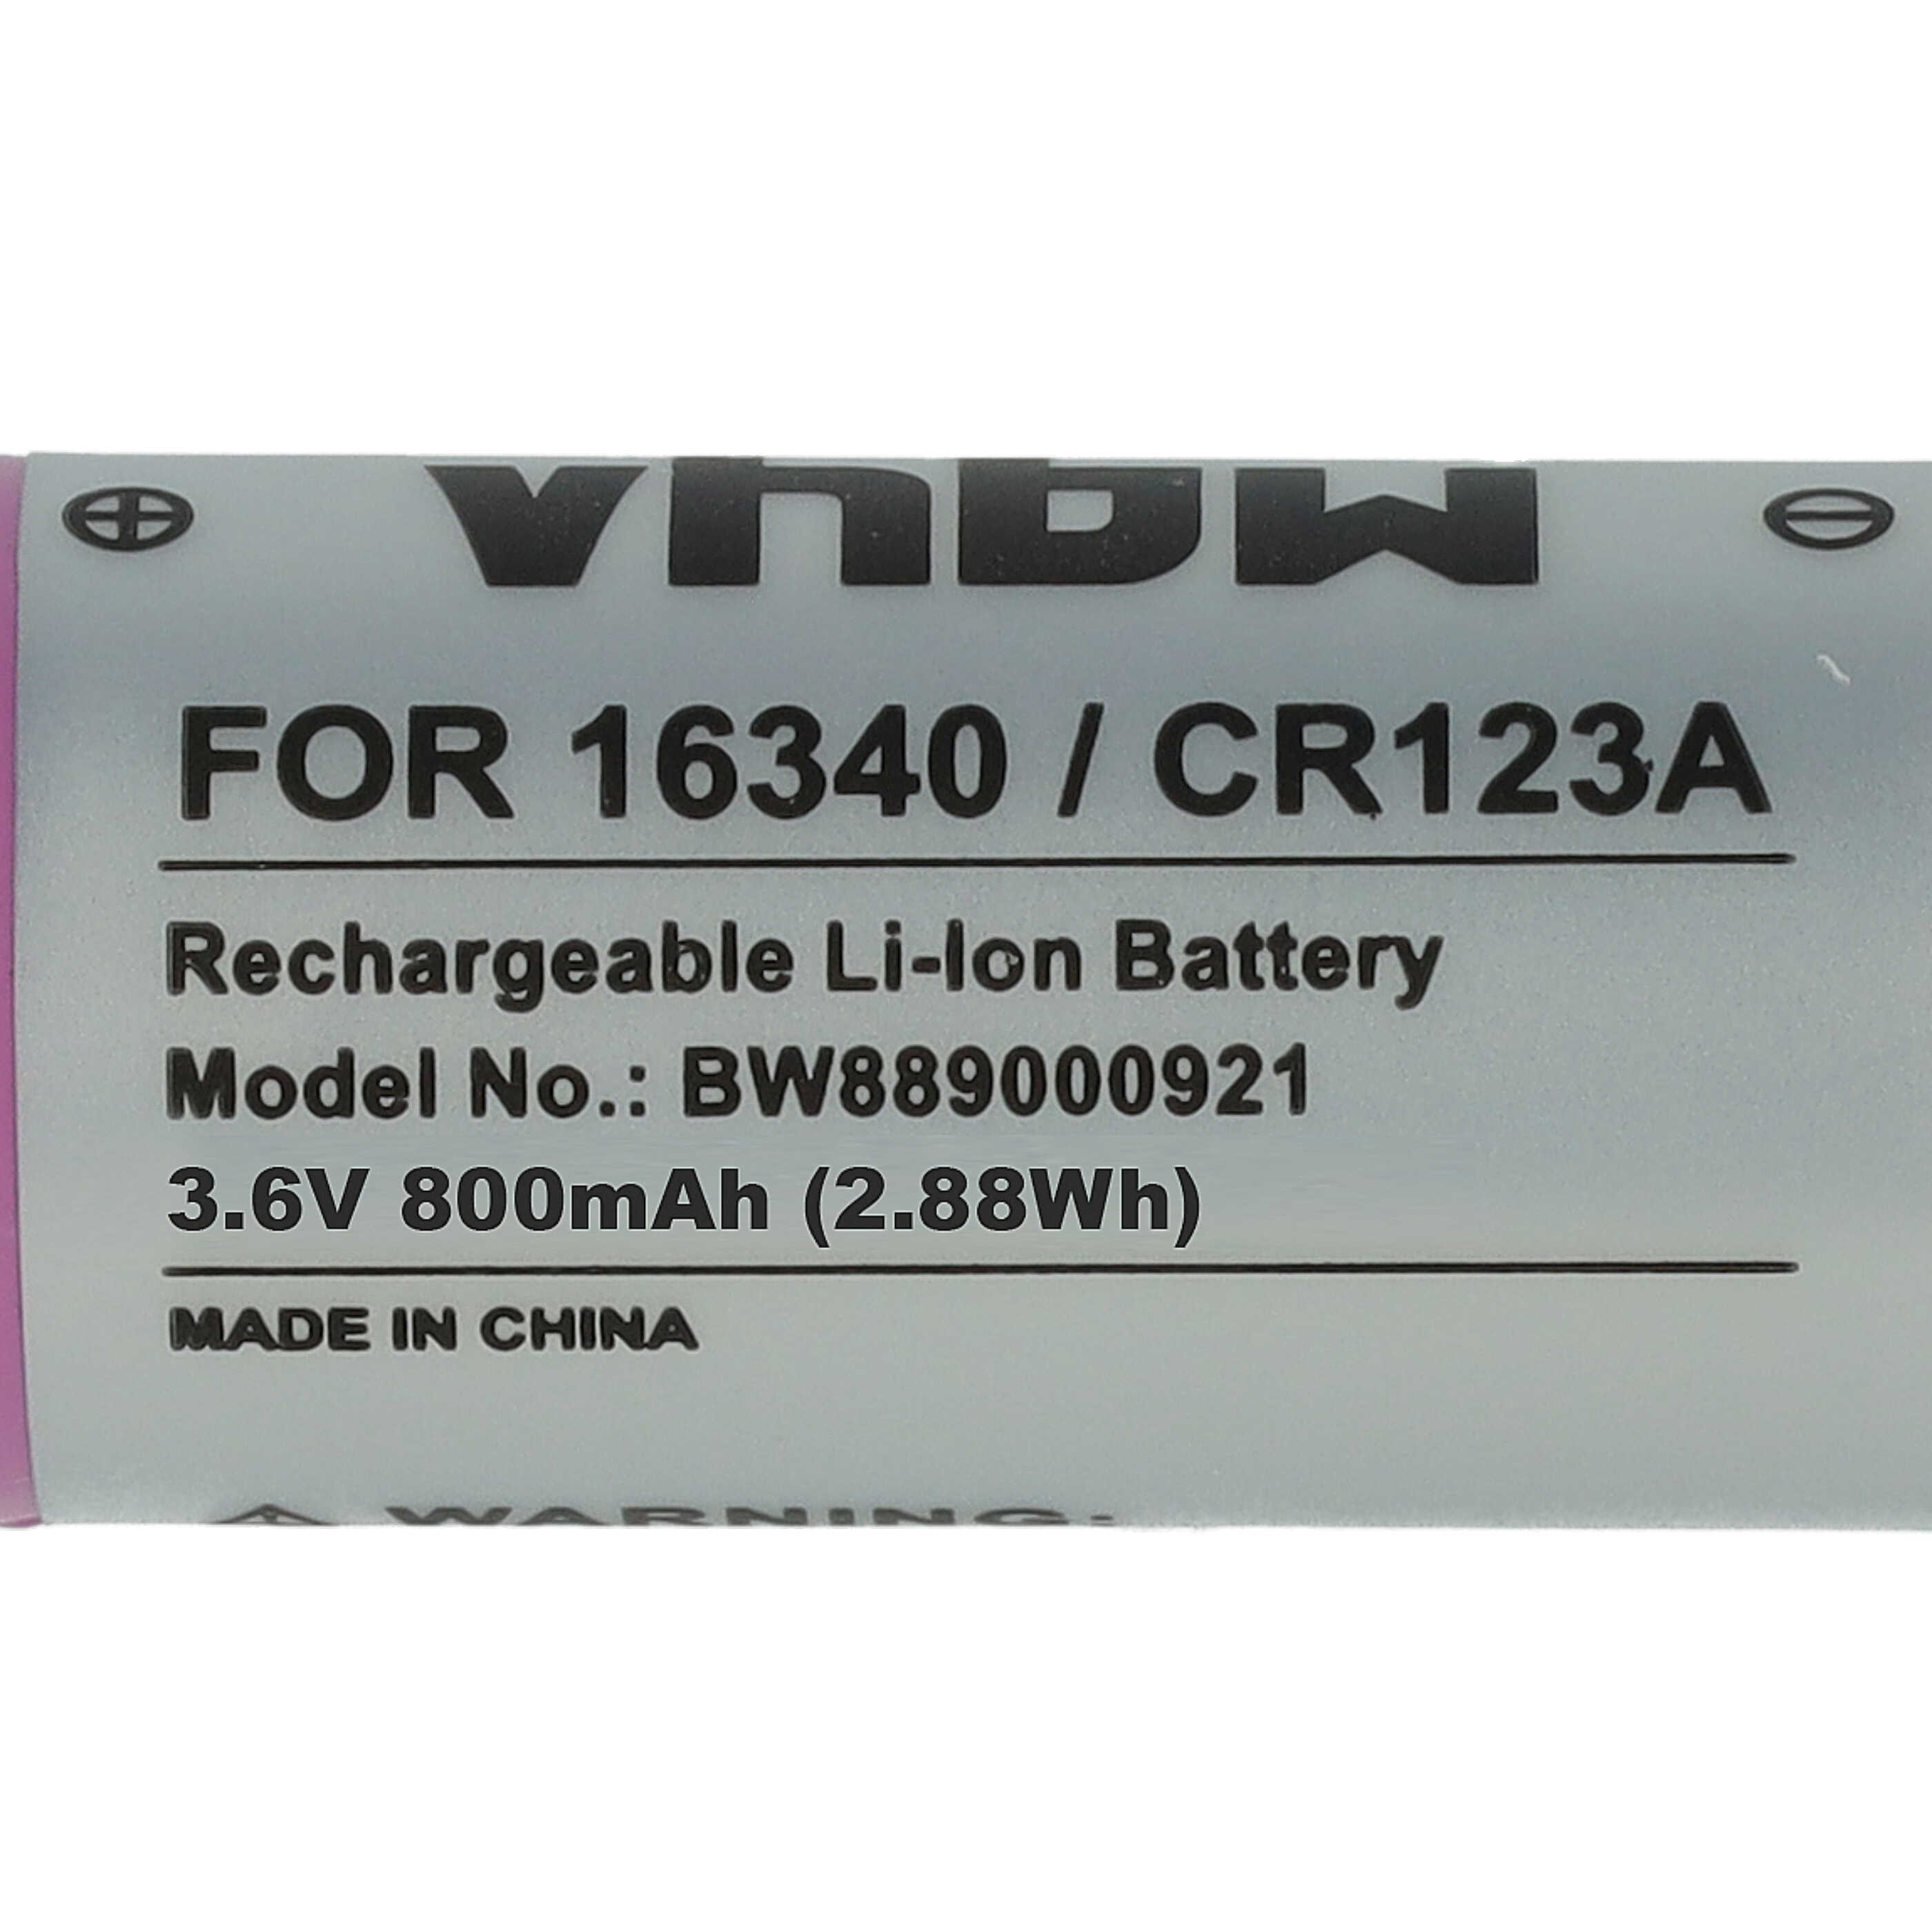 Universal Battery (10 Units) Replacement for 16340, CR123R, CR17335, CR17345, CR123A - 800mAh 3.6V Li-Ion